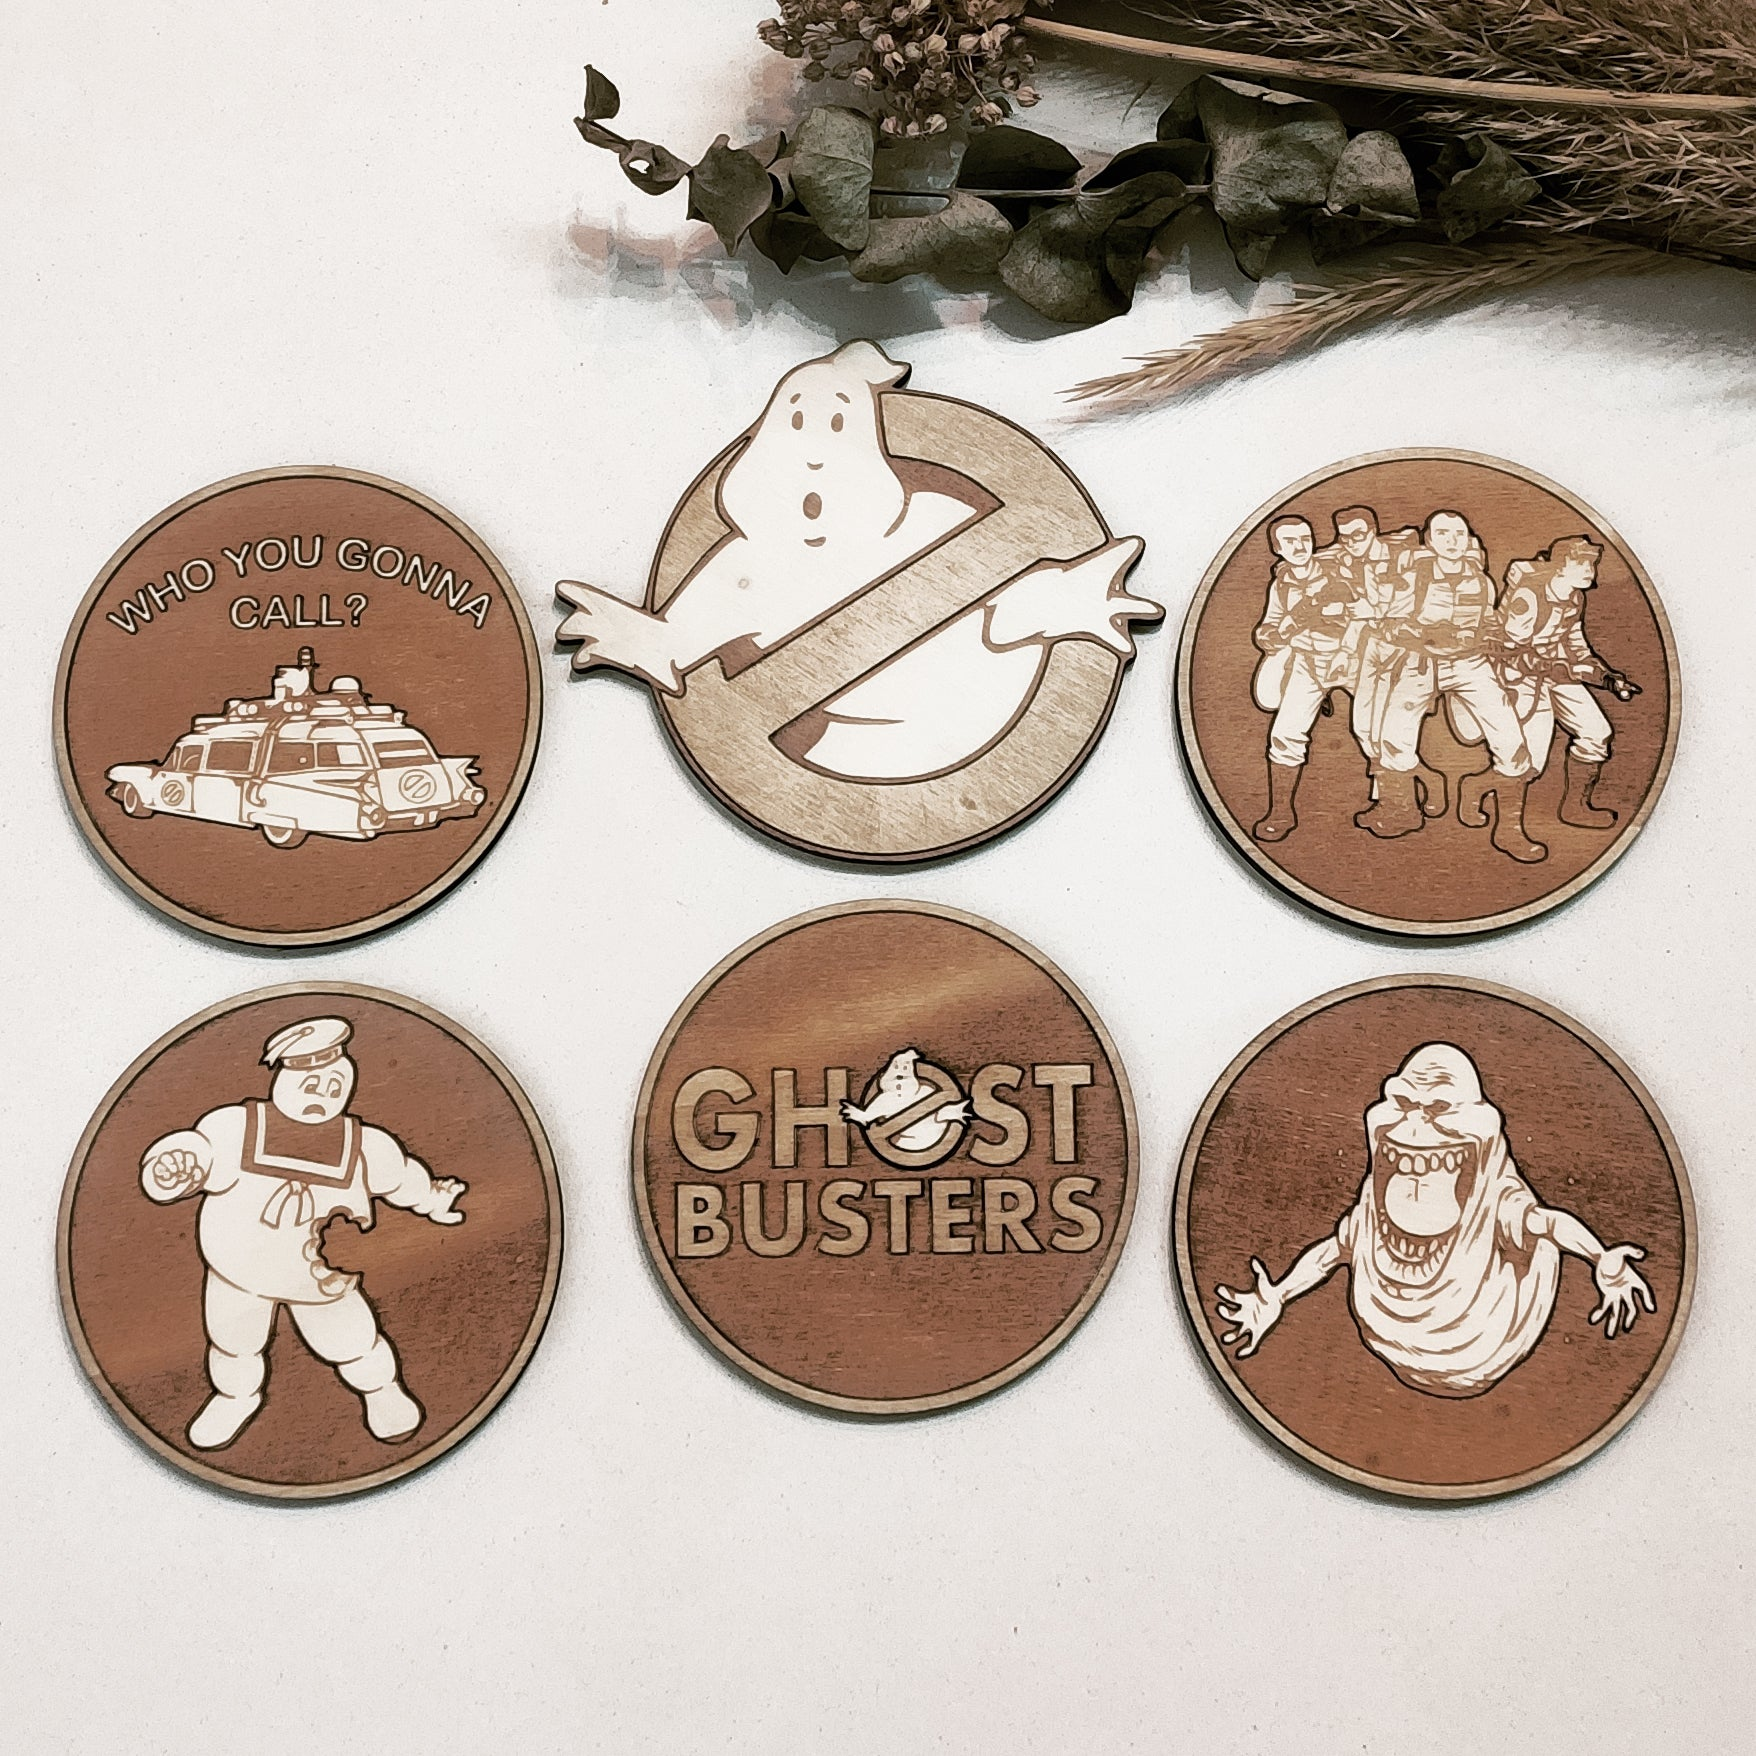 Set of 6 Ghostbusters Wooden Coasters - Handmade Gift - Housewarming - Wood Kitchenware